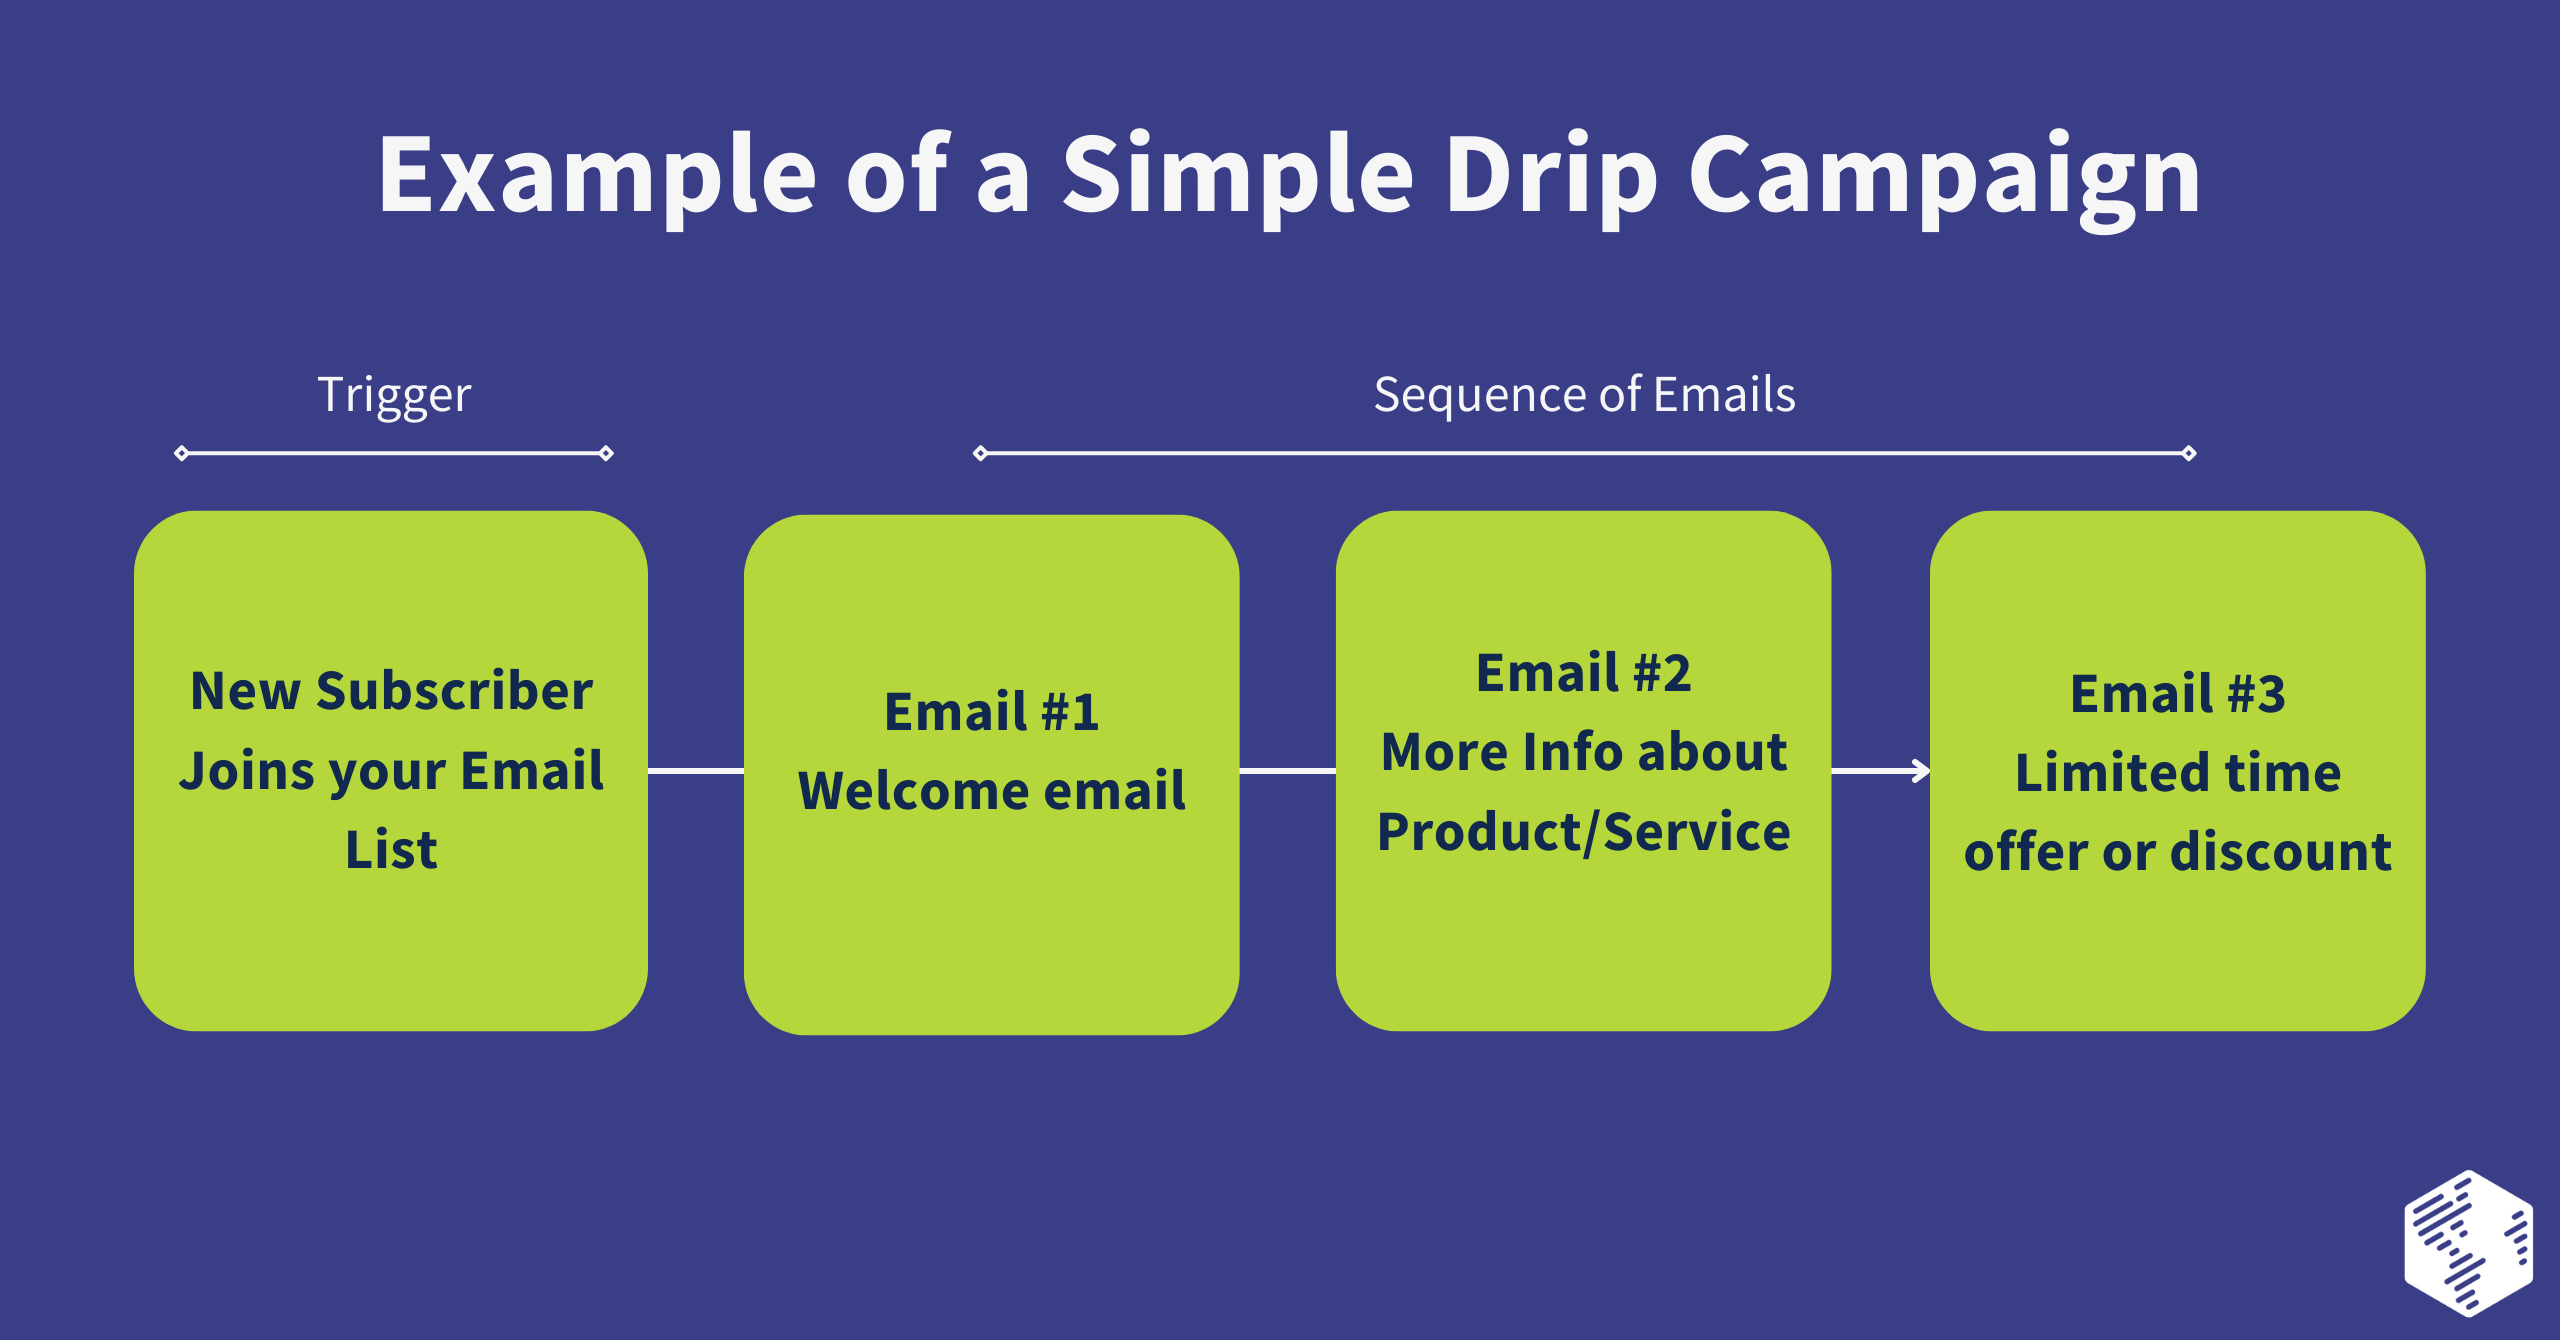 Example of a Drip Campaign